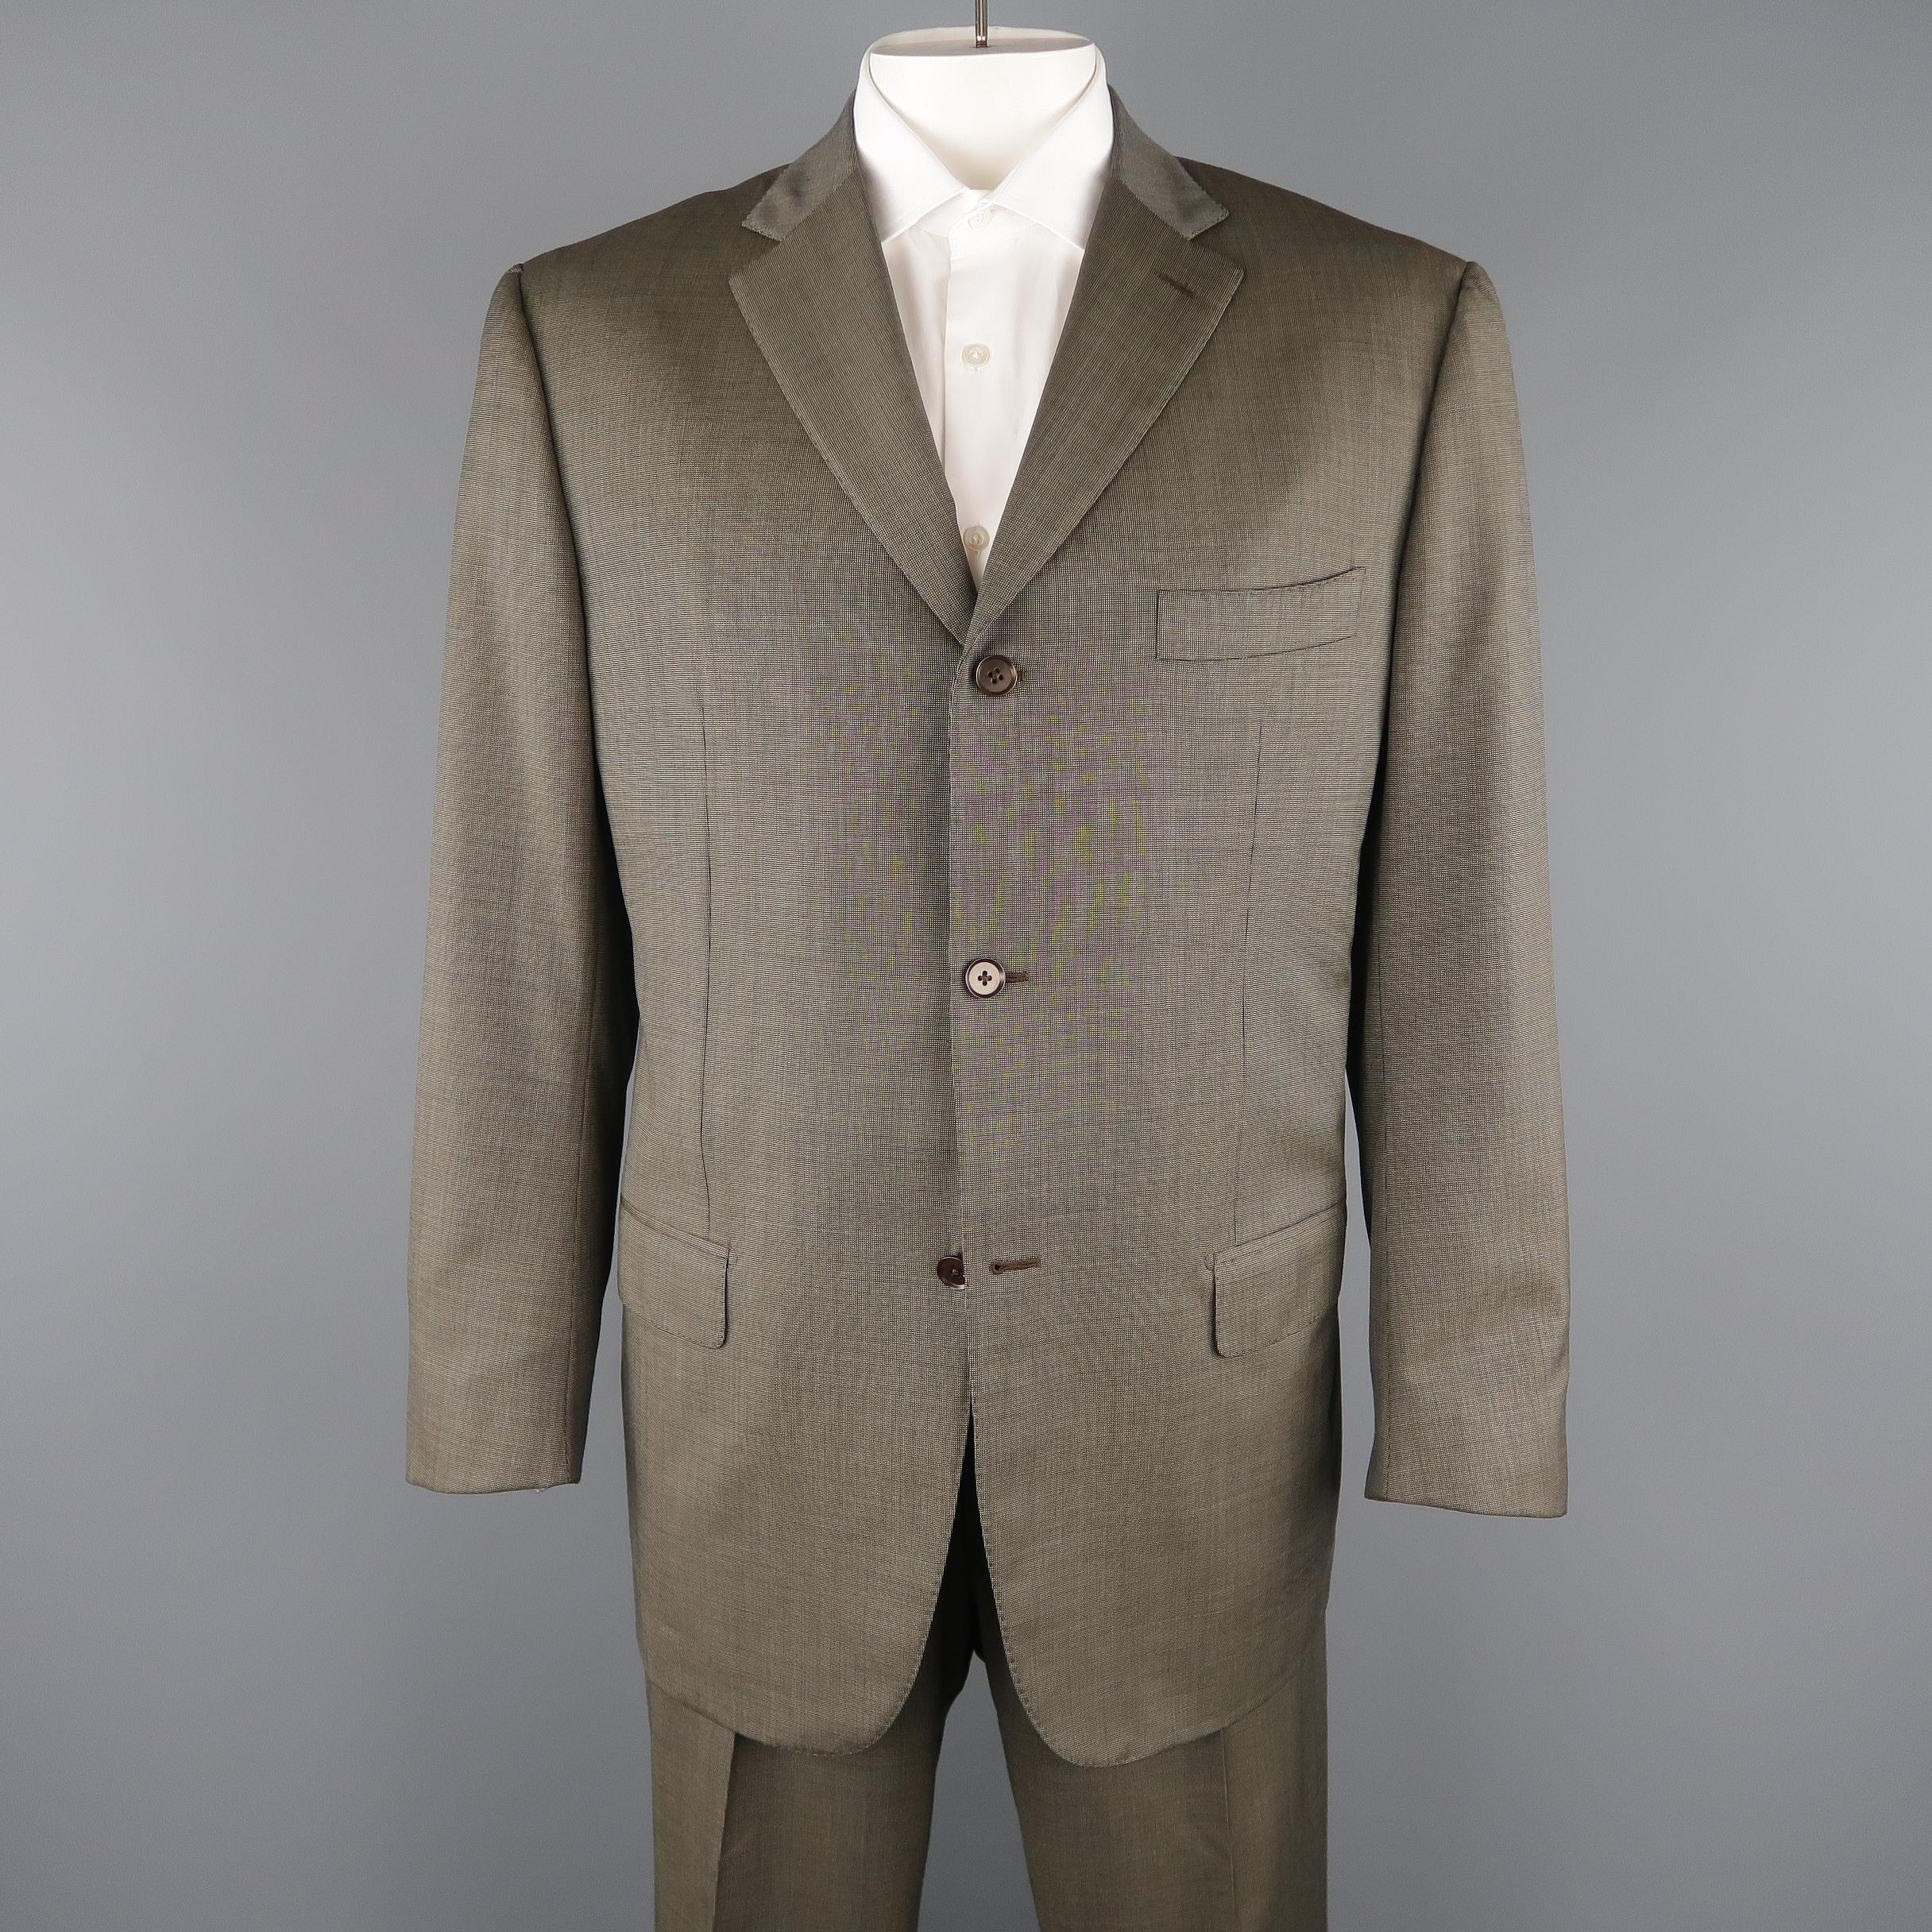 ISAIA two piece suit comes in taupe beige Nailhead pattern wool and includes a single breasted, three button, notch lapel sport coat with functional button cuffs and matching flat front trousers. 

Made in Italy.
 
Excellent Pre-Owned